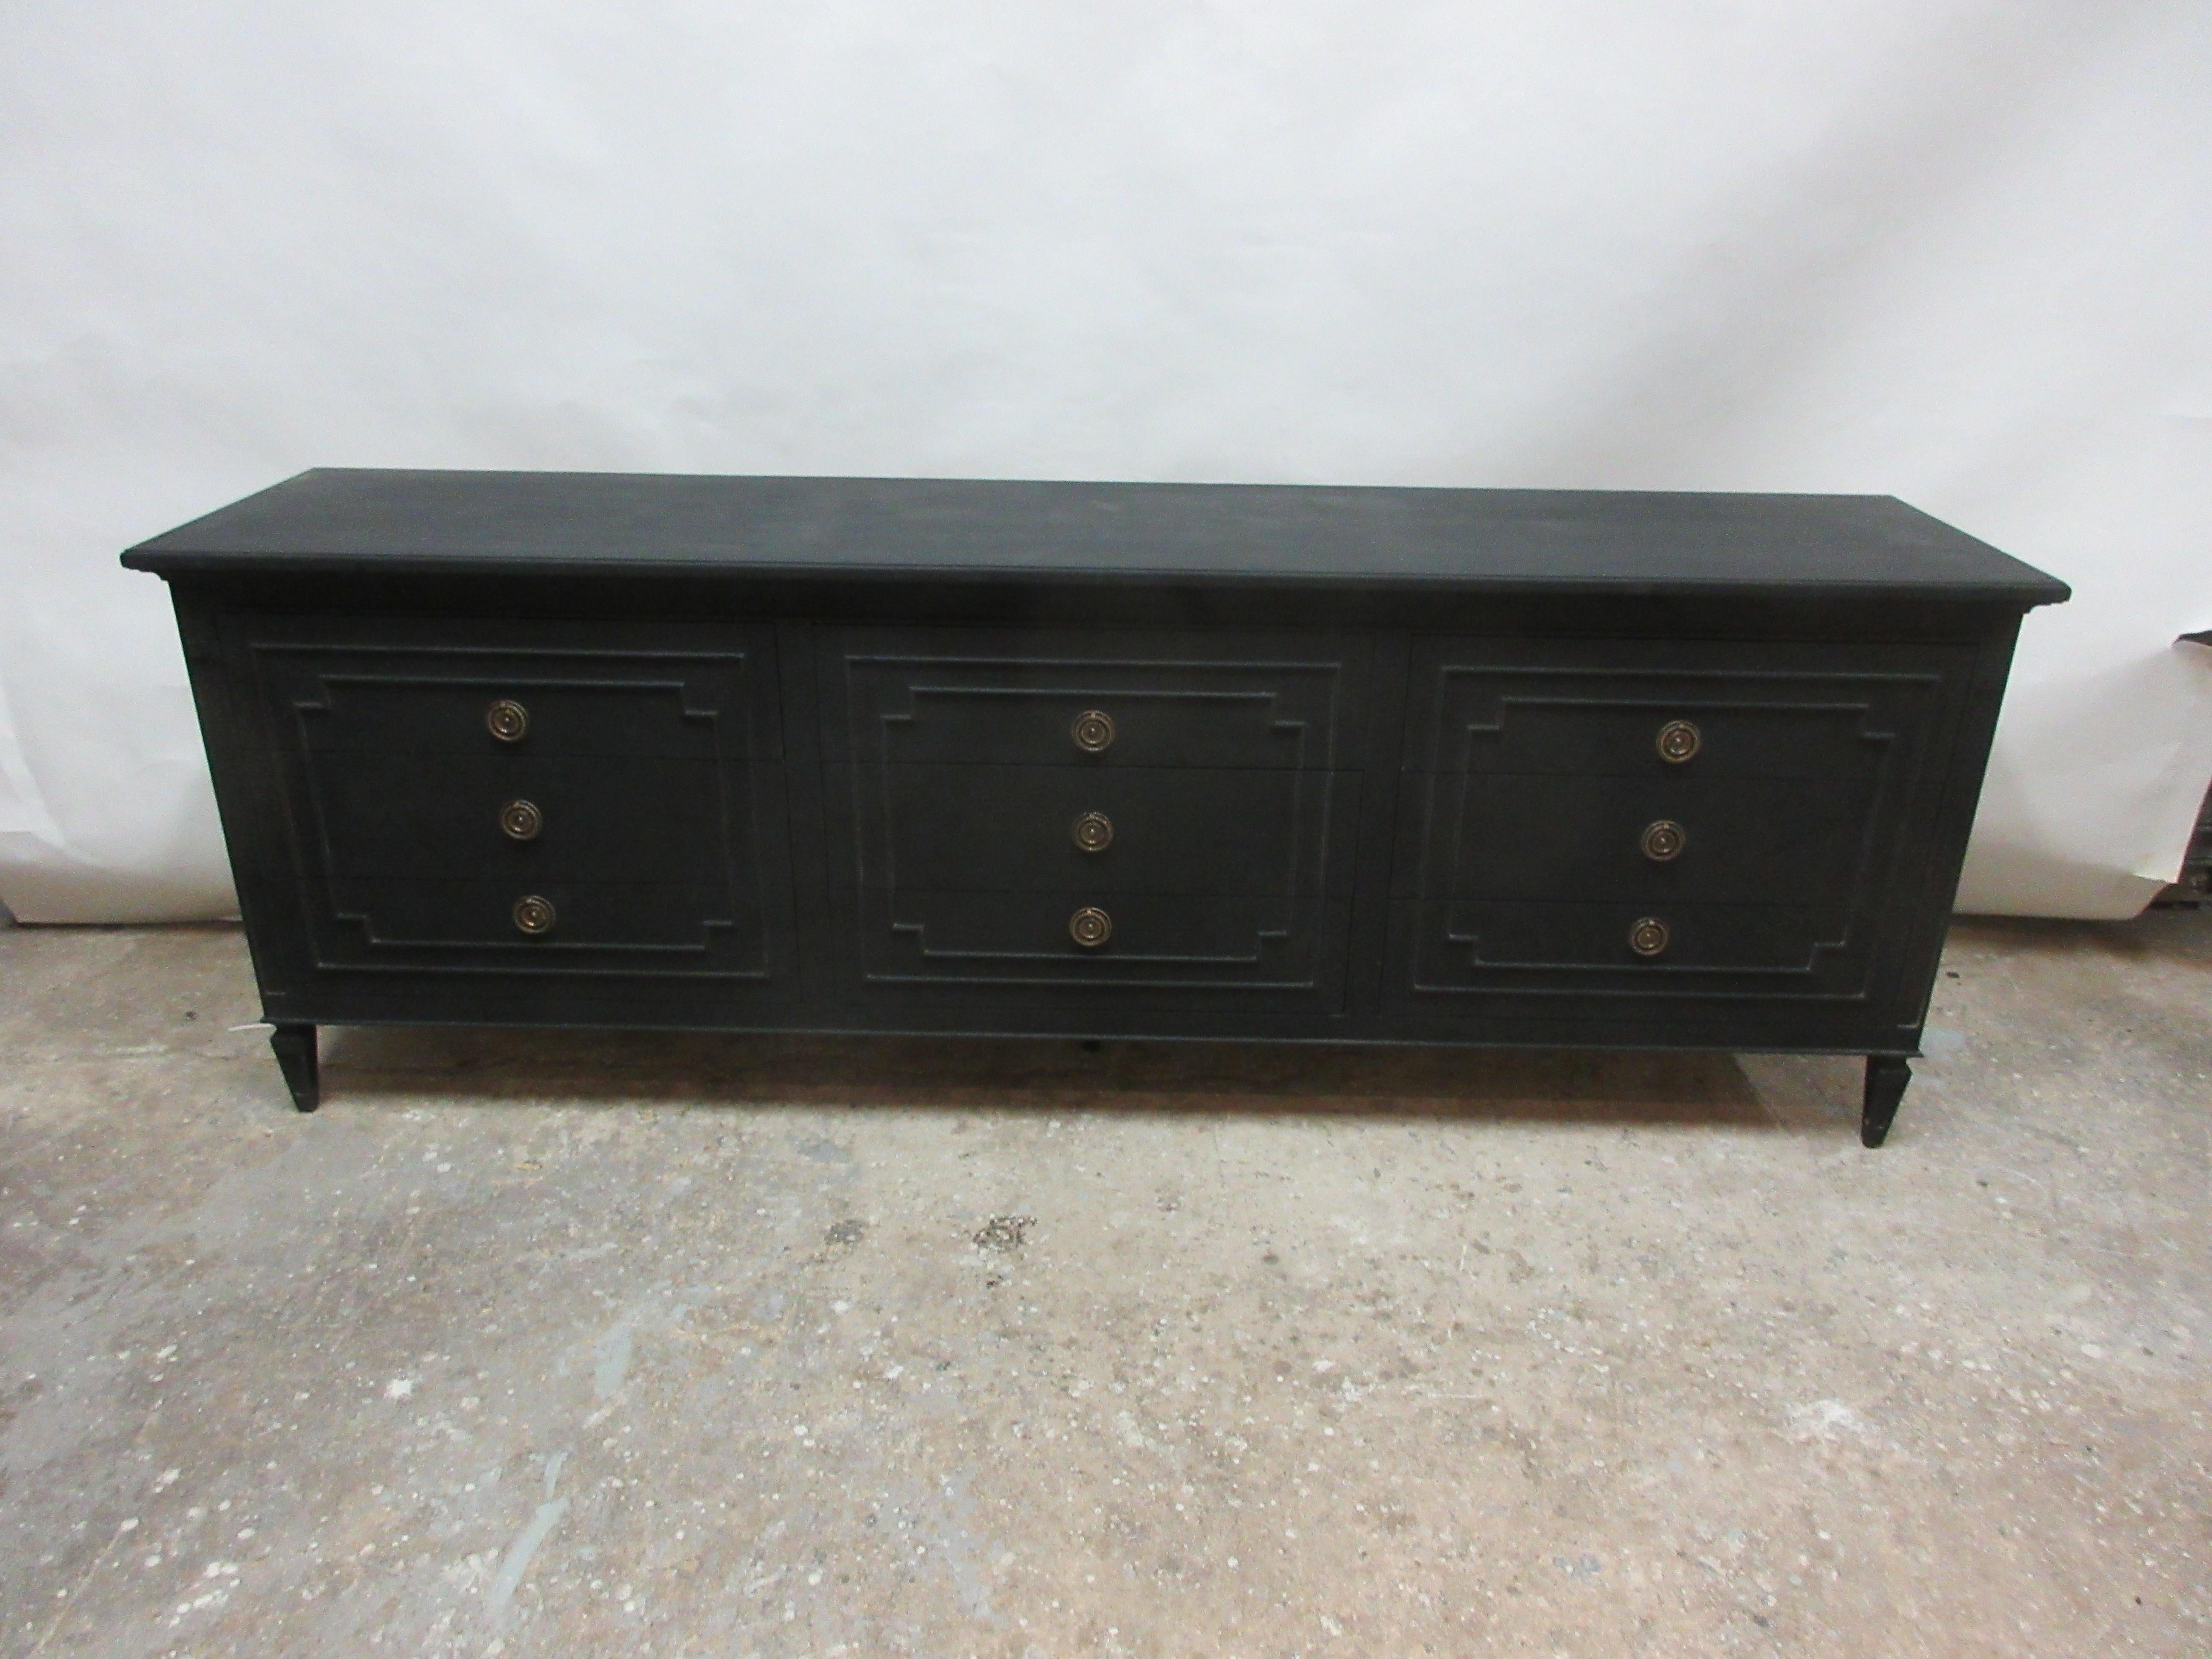 This is a Swedish Gustavian style 9-drawer dresser. It’s been restored and repainted with milk paints 